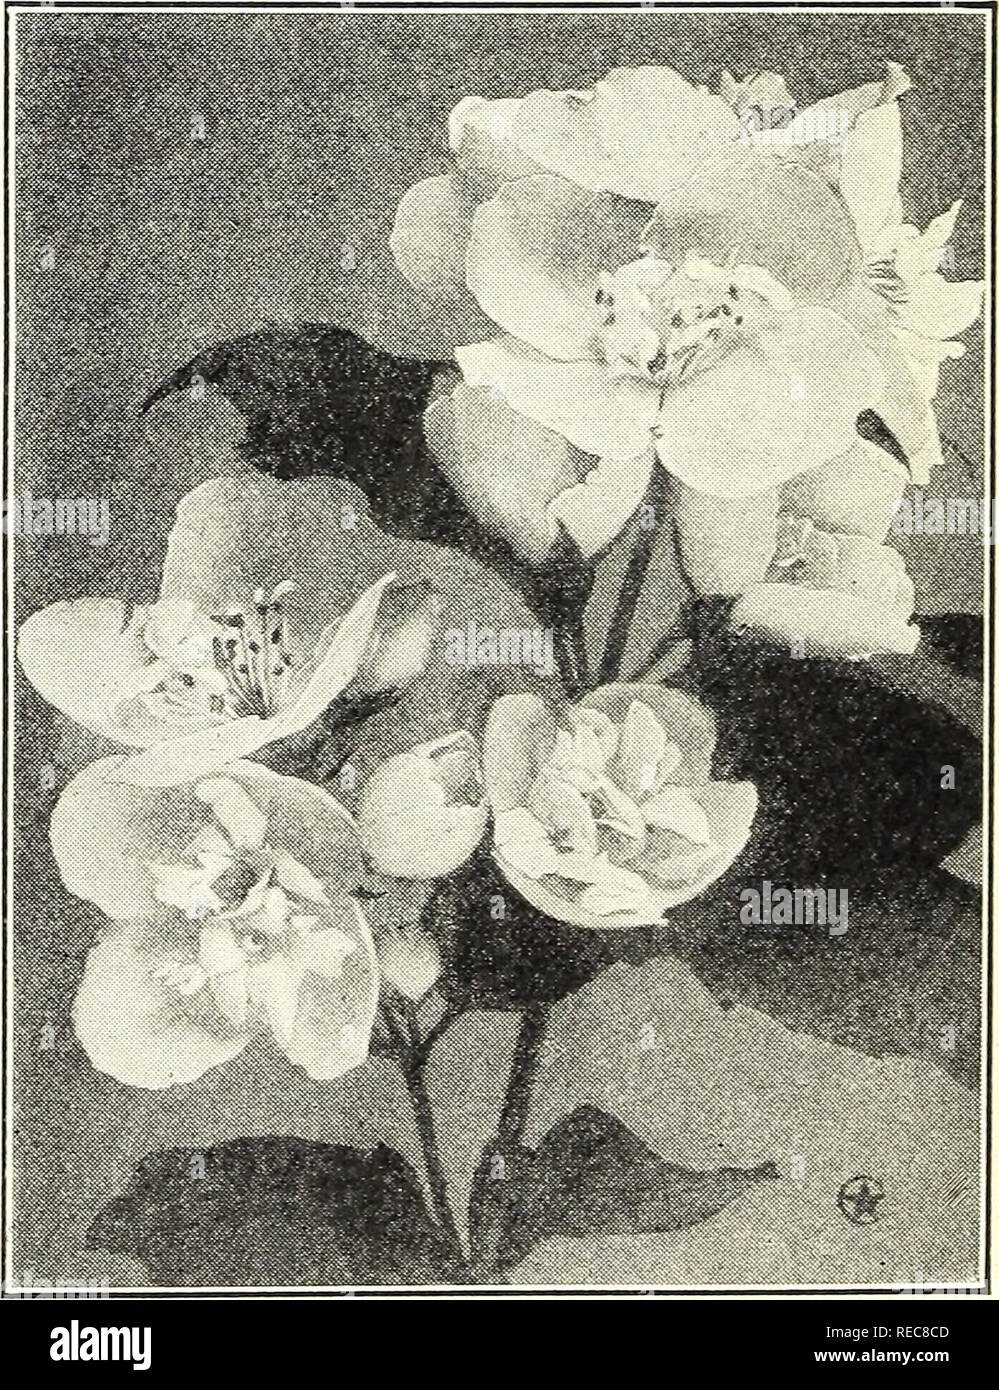 . Conard star roses : autumn 1924. Rose culture; Roses; Flowers Seeds Catalogs; Plants, Ornamental Seeds Catalogs. Hydrangea paniculata grandiflora. Blooms for 3 months Two Forsythias (Golden Bells) Forsythia spectabilis. This shrub has seemed to us, after several years' trial, as the most desirable of the Forsythias. The habit is compact and every branch is closely covered with yellow flowers before the foliage appears. Price, i-yr. size, 50 cts., postpaid; 2-yr. size, $1 n F. viridissima. The earliest blooming shrub. The vivid yellow flowers tell you that spring has come. Honeysuckle, Bush ( Stock Photo